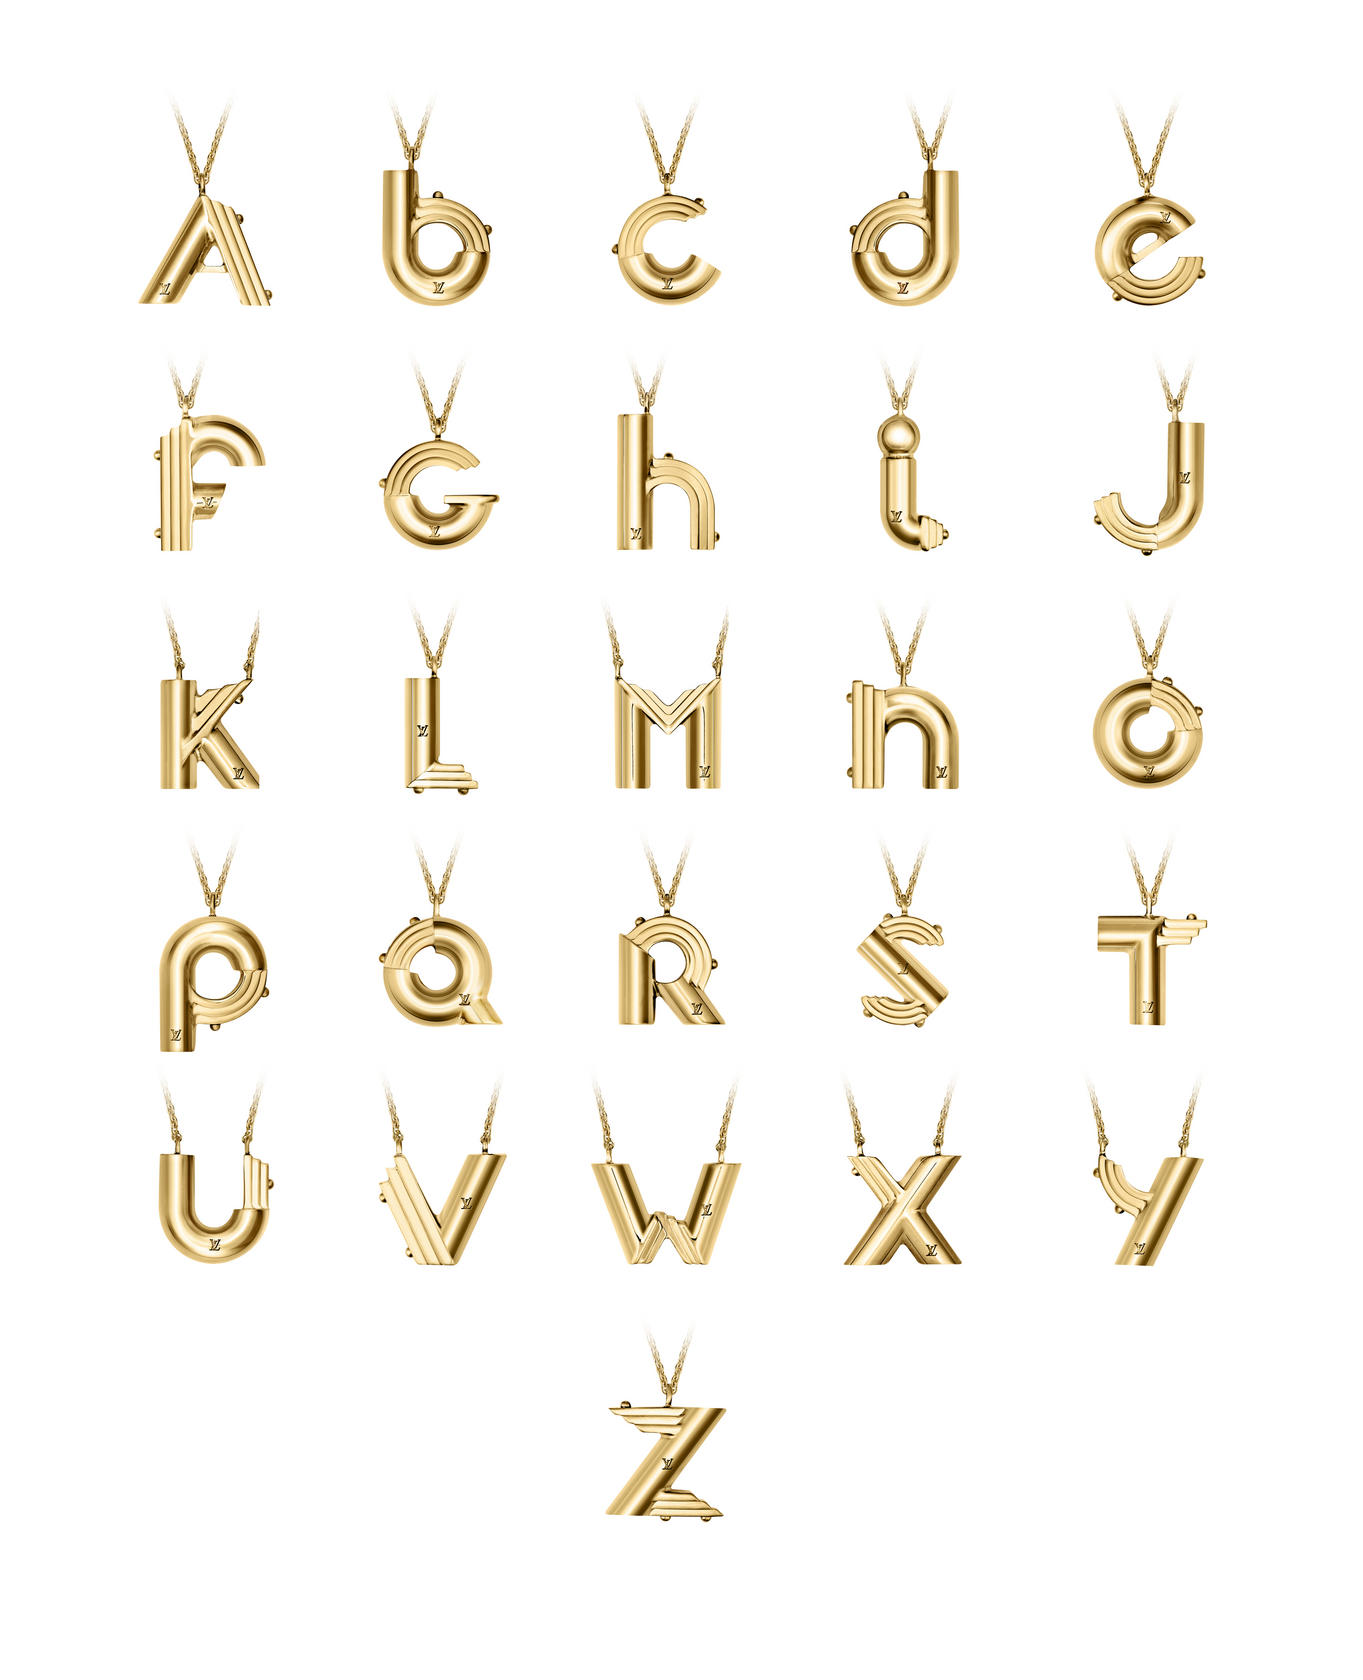 Louis Vuitton unveils redesigned alphabet pendant | South China Morning Post